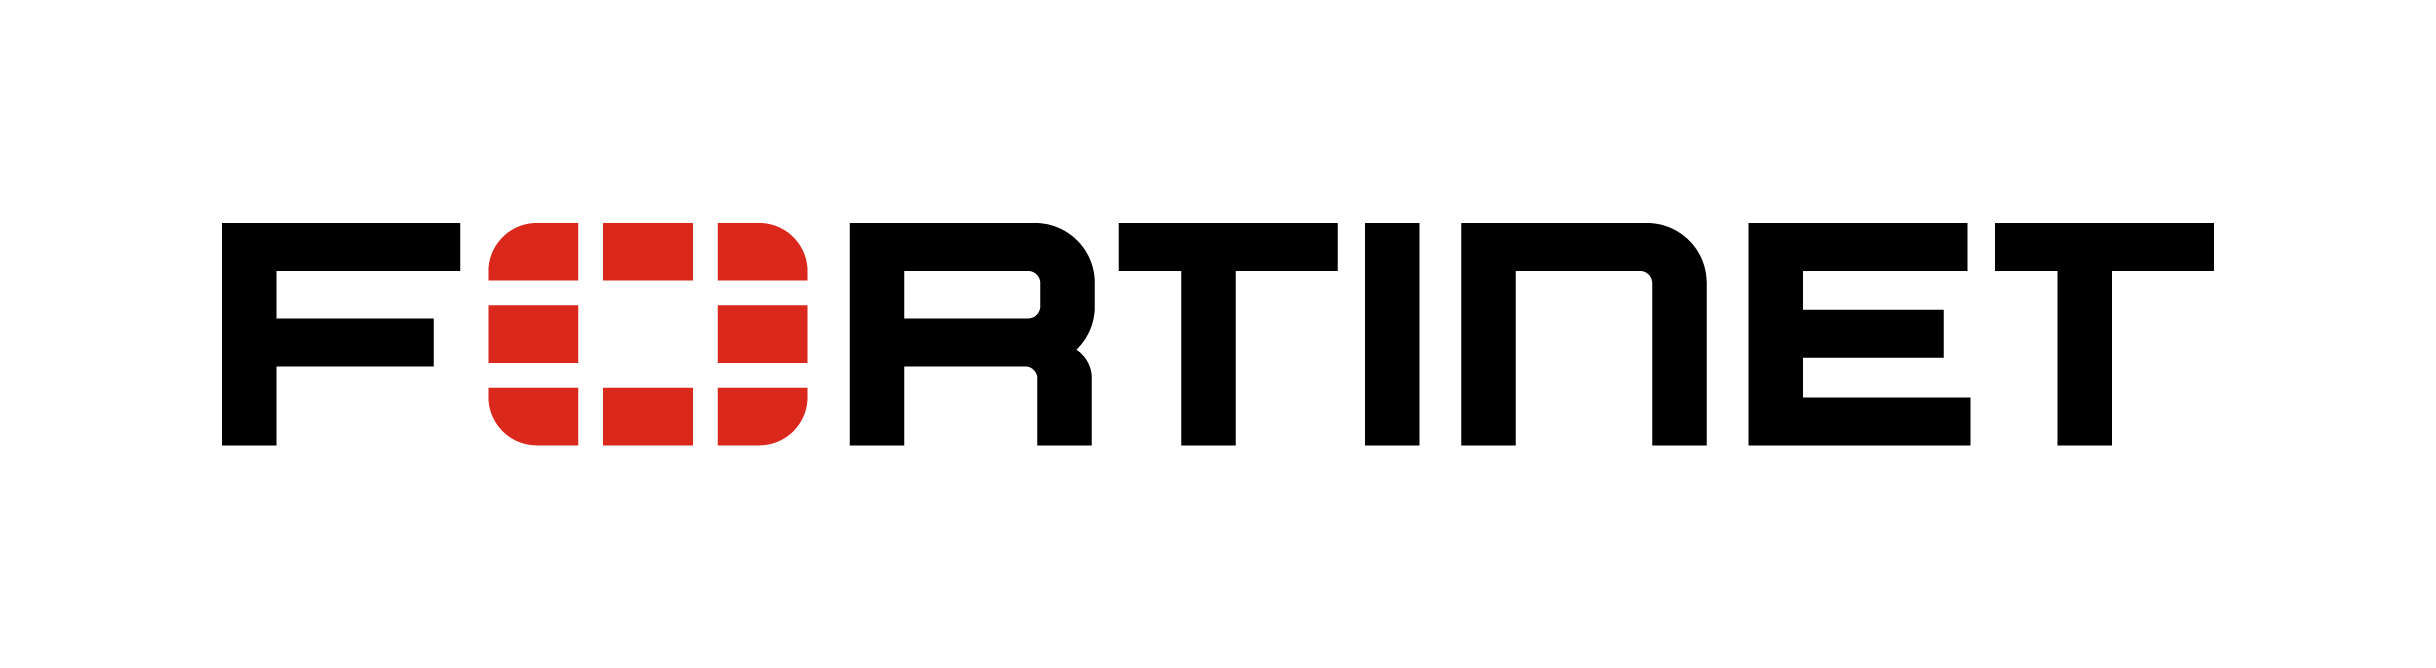 Fortinet_Logos_Color.png